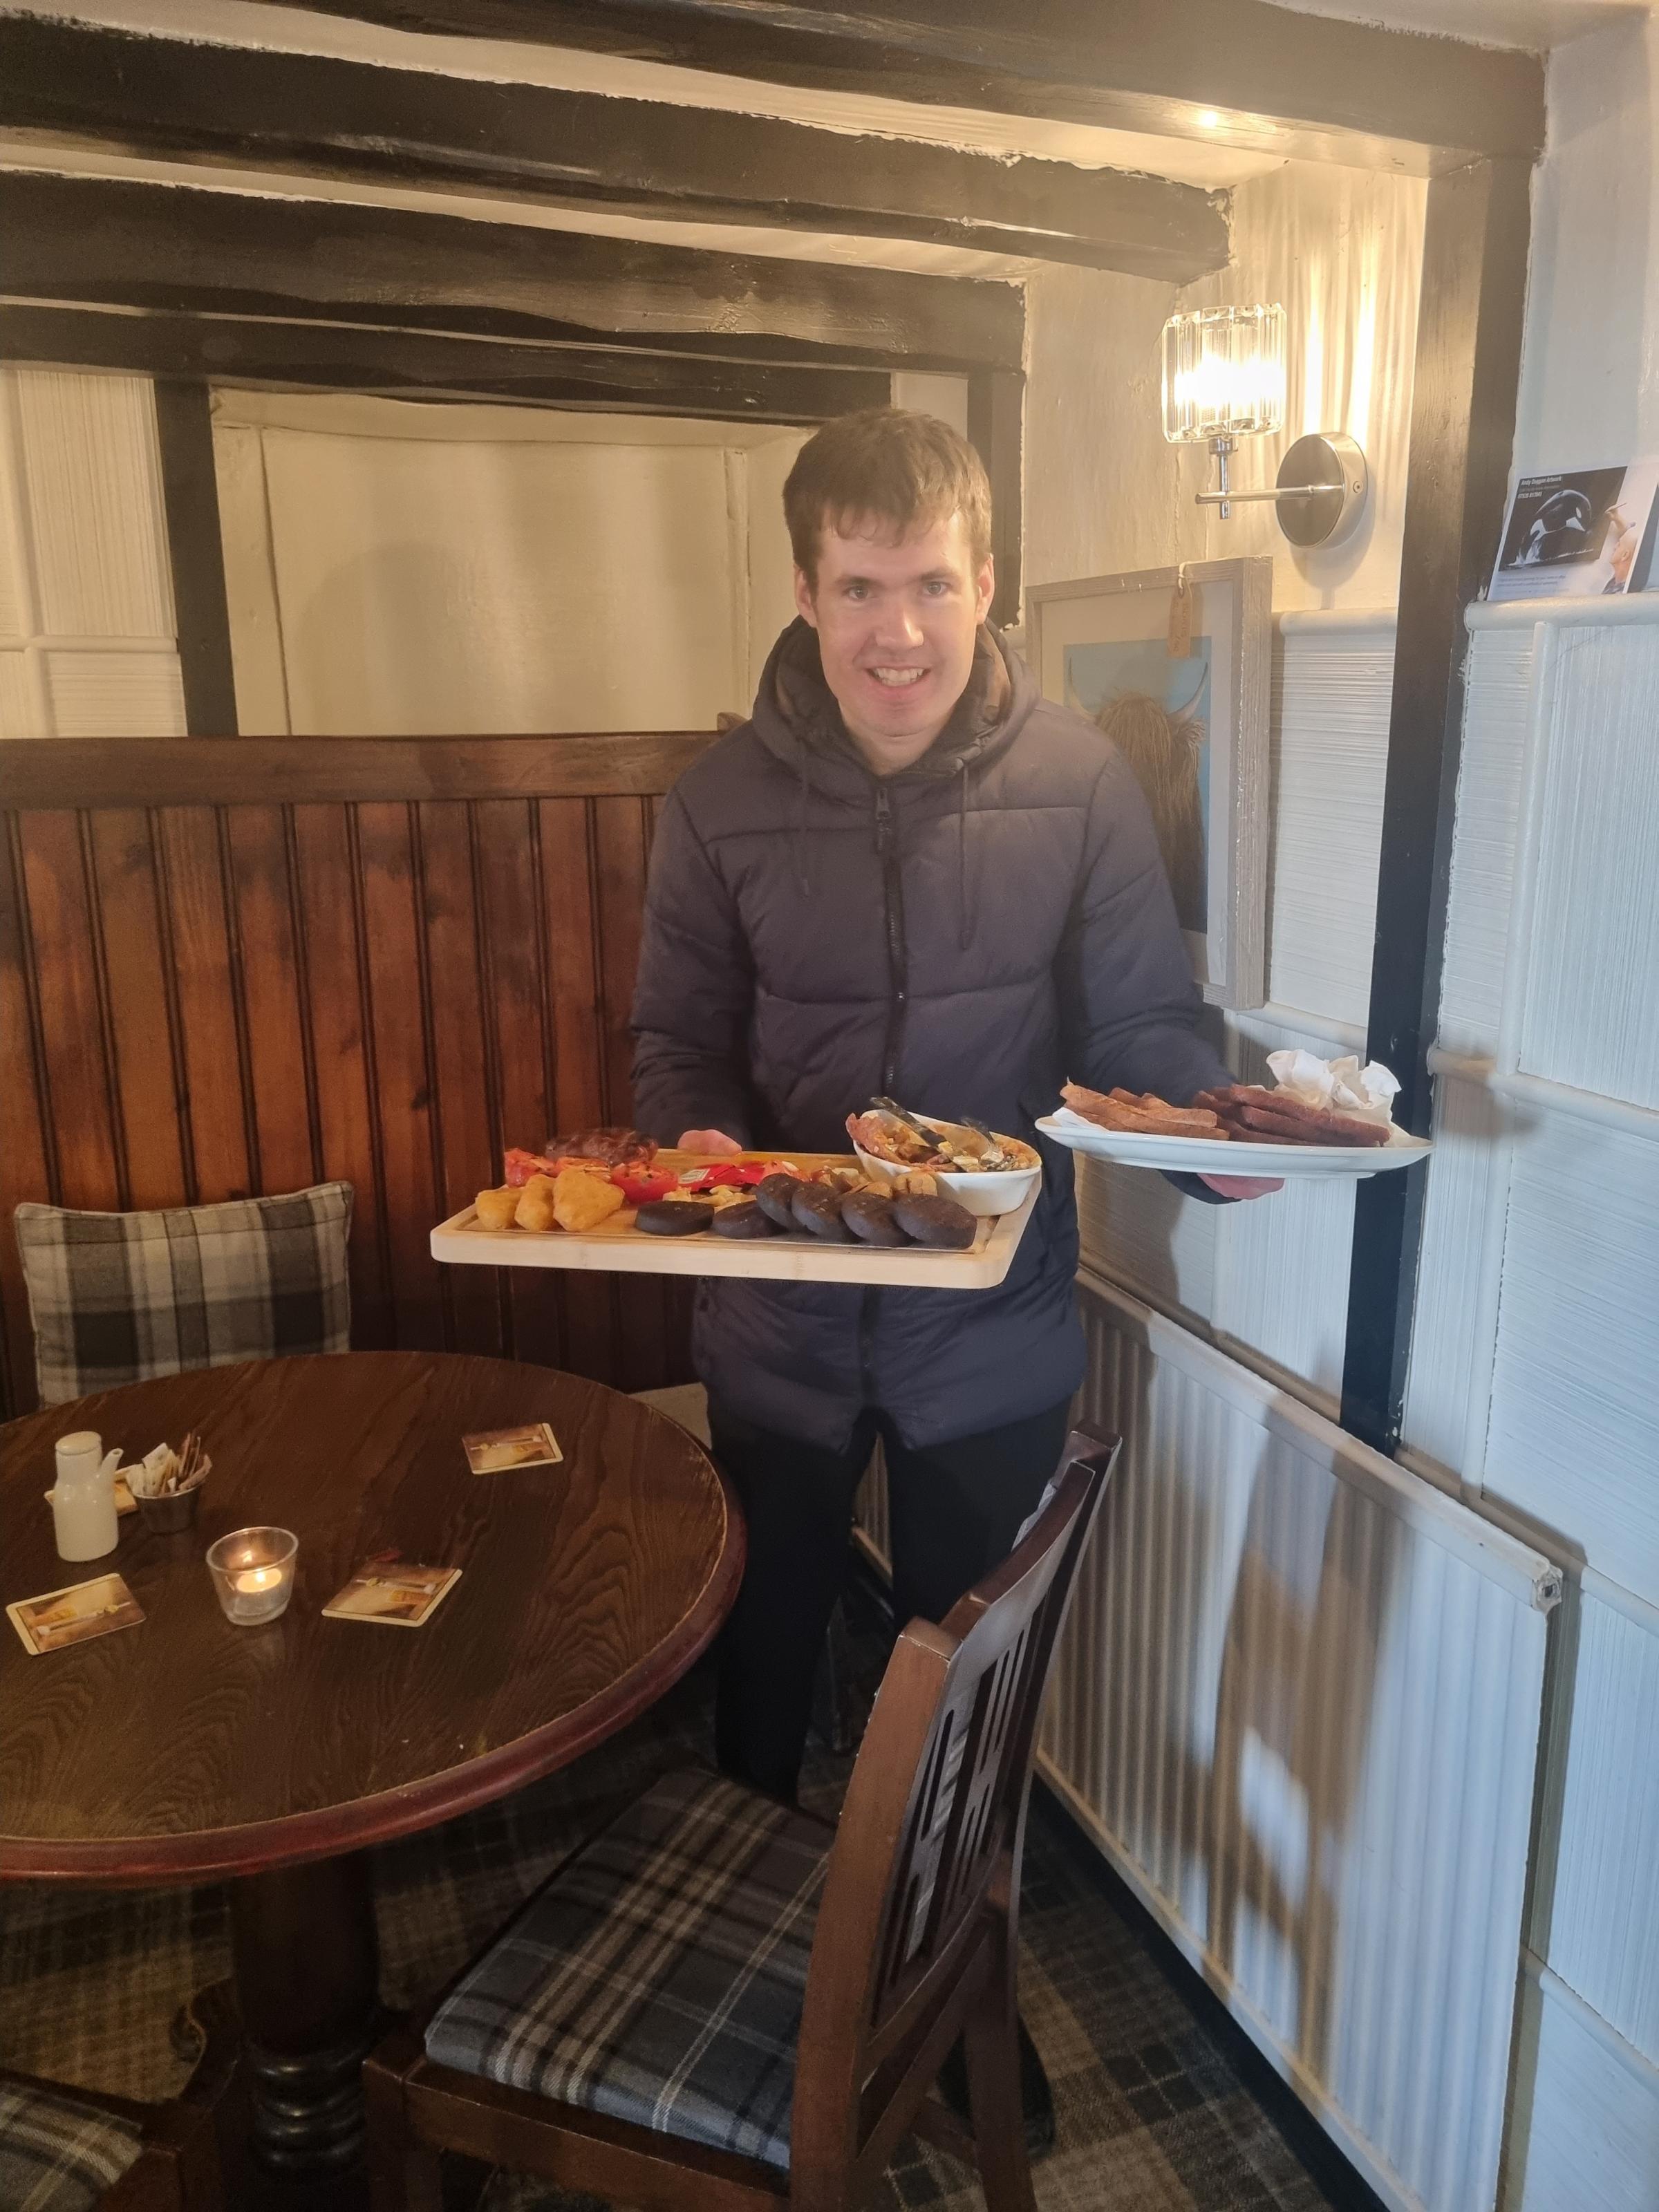 Reporter James Mutch with the half-completed plate of food